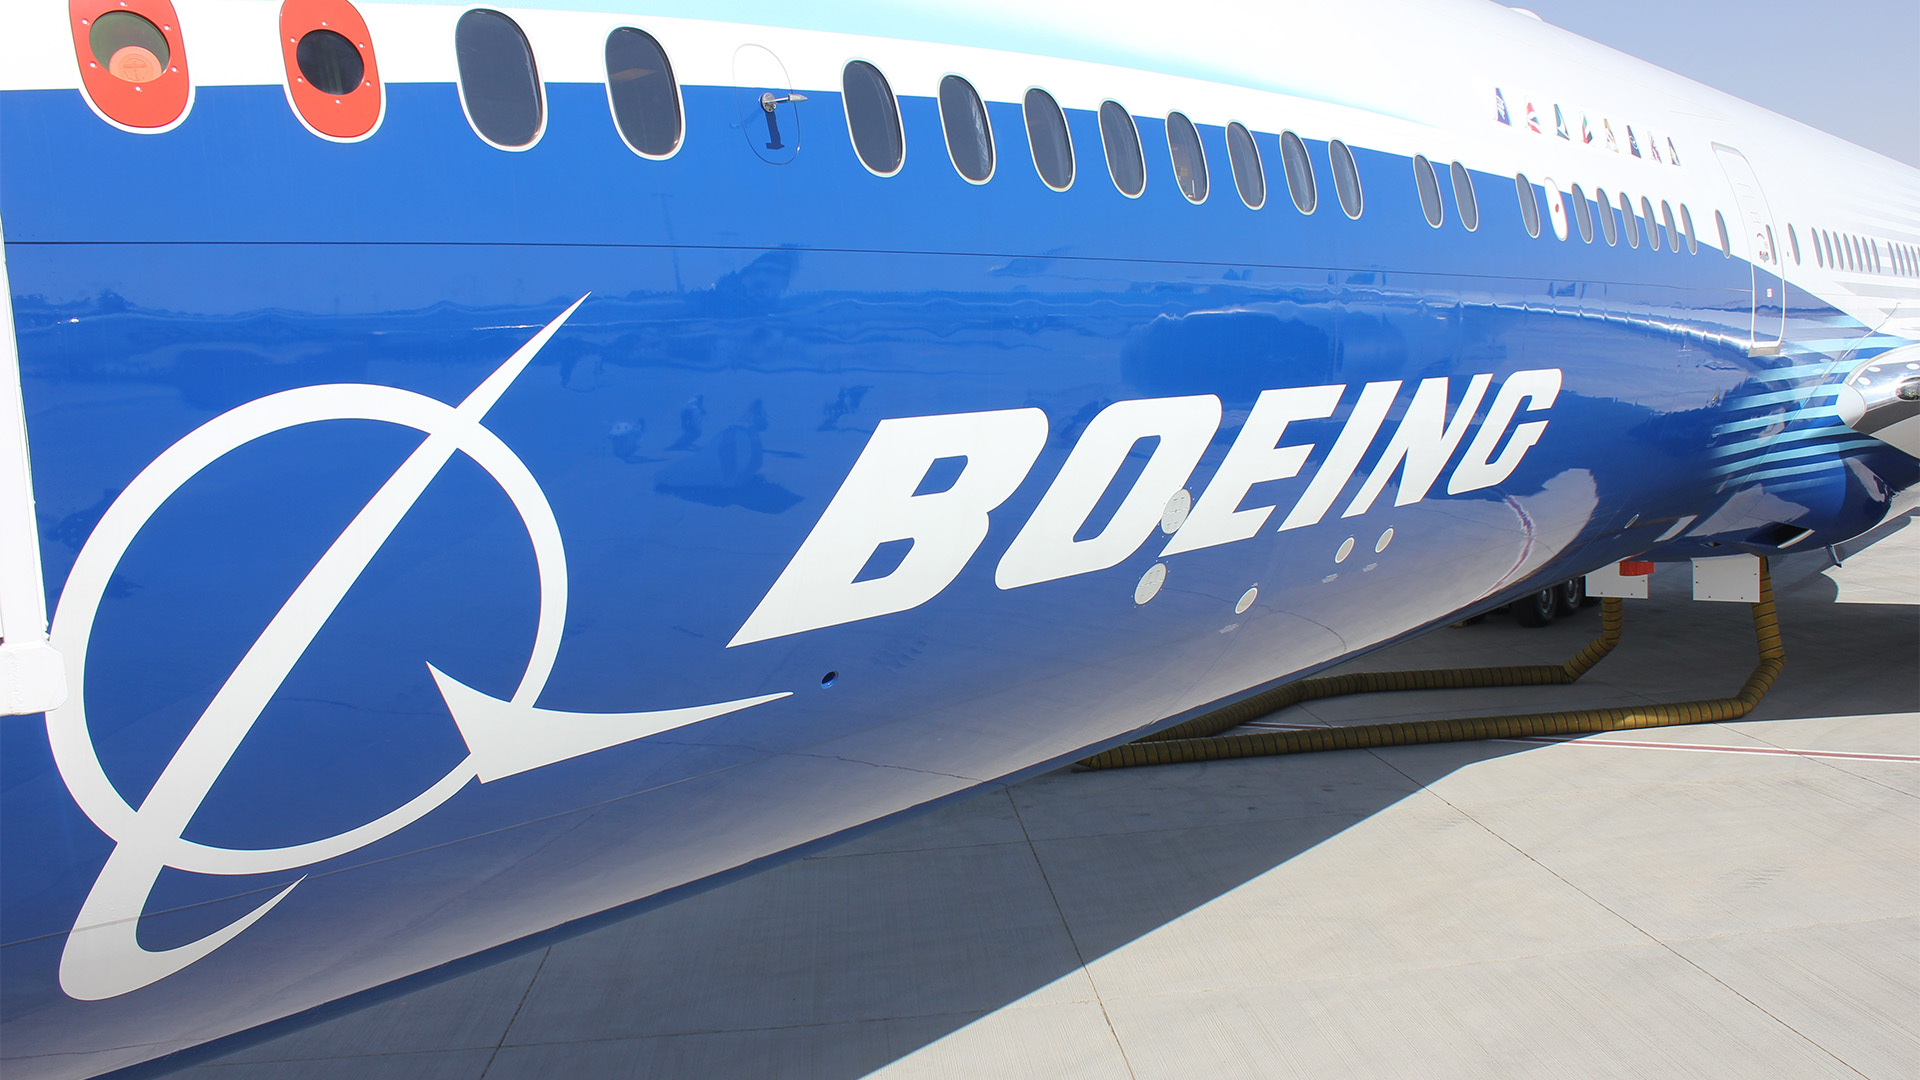 Boeing’s struggles: Losses, downgrades, and liquidity worries